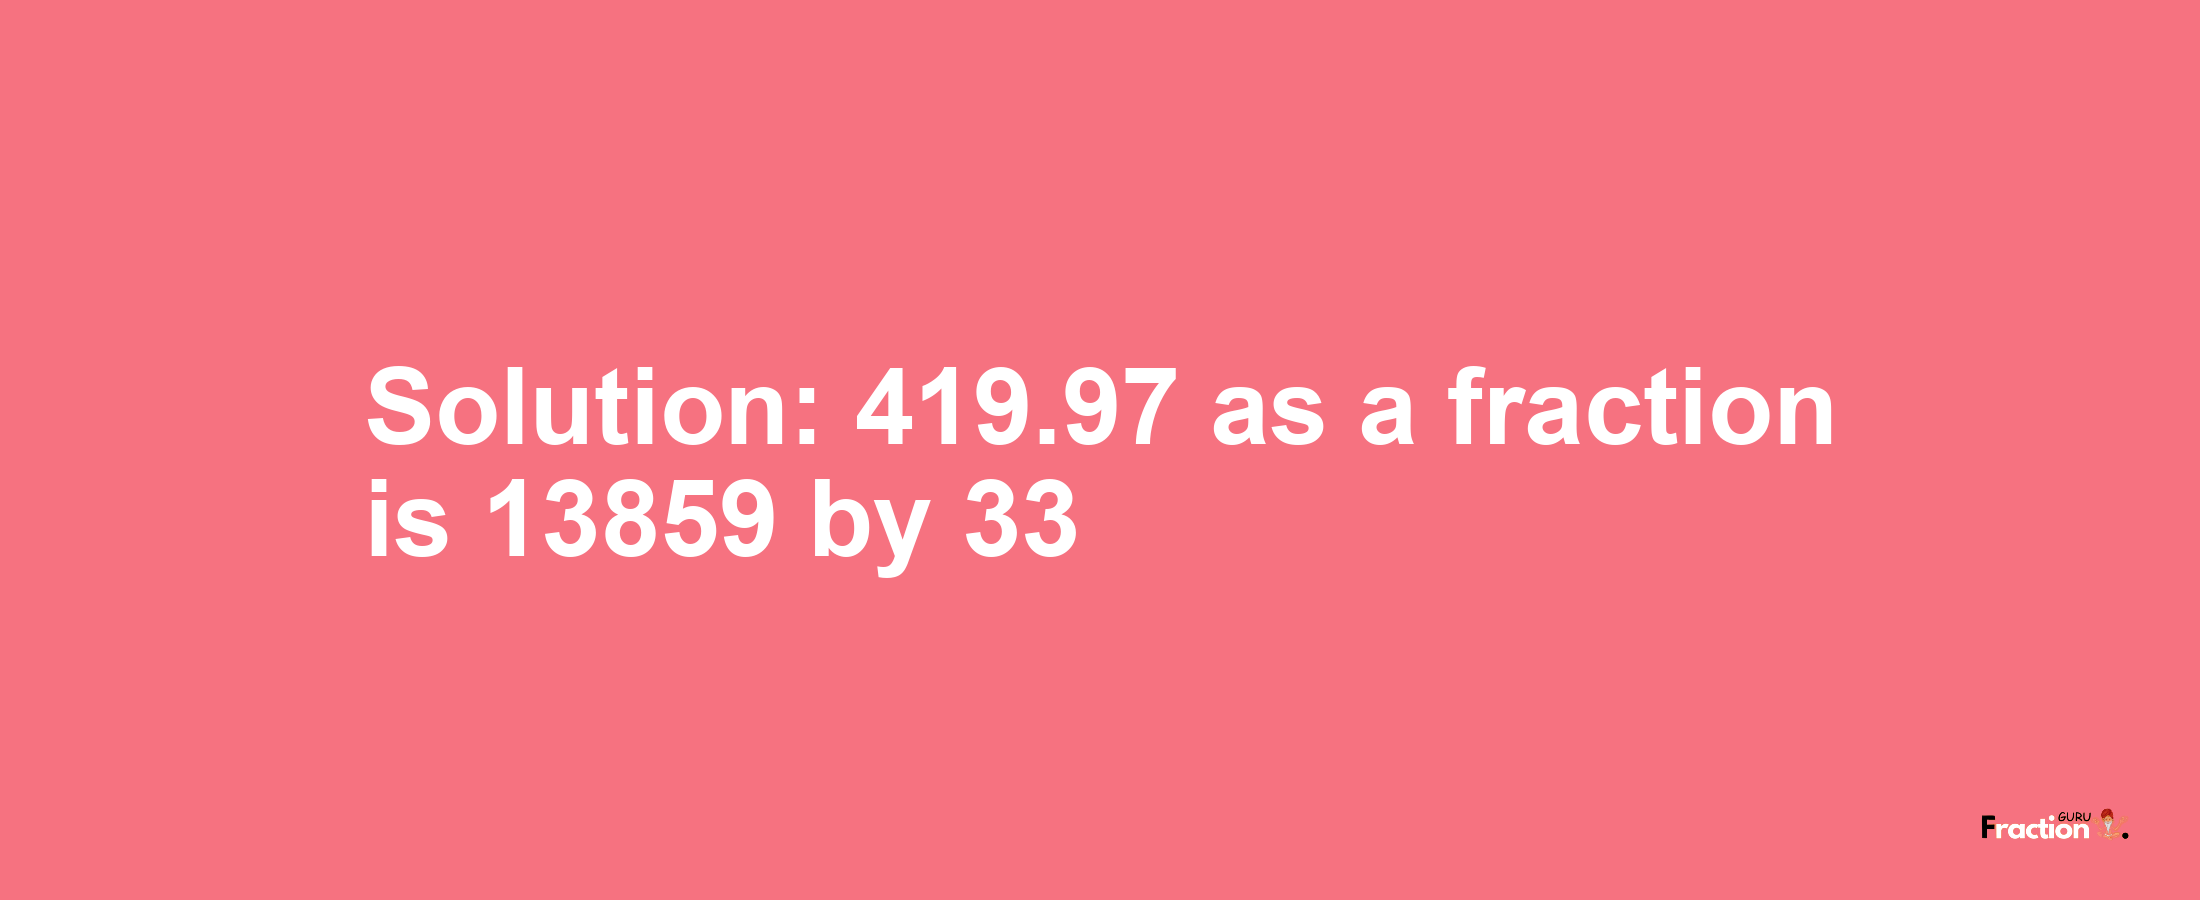 Solution:419.97 as a fraction is 13859/33